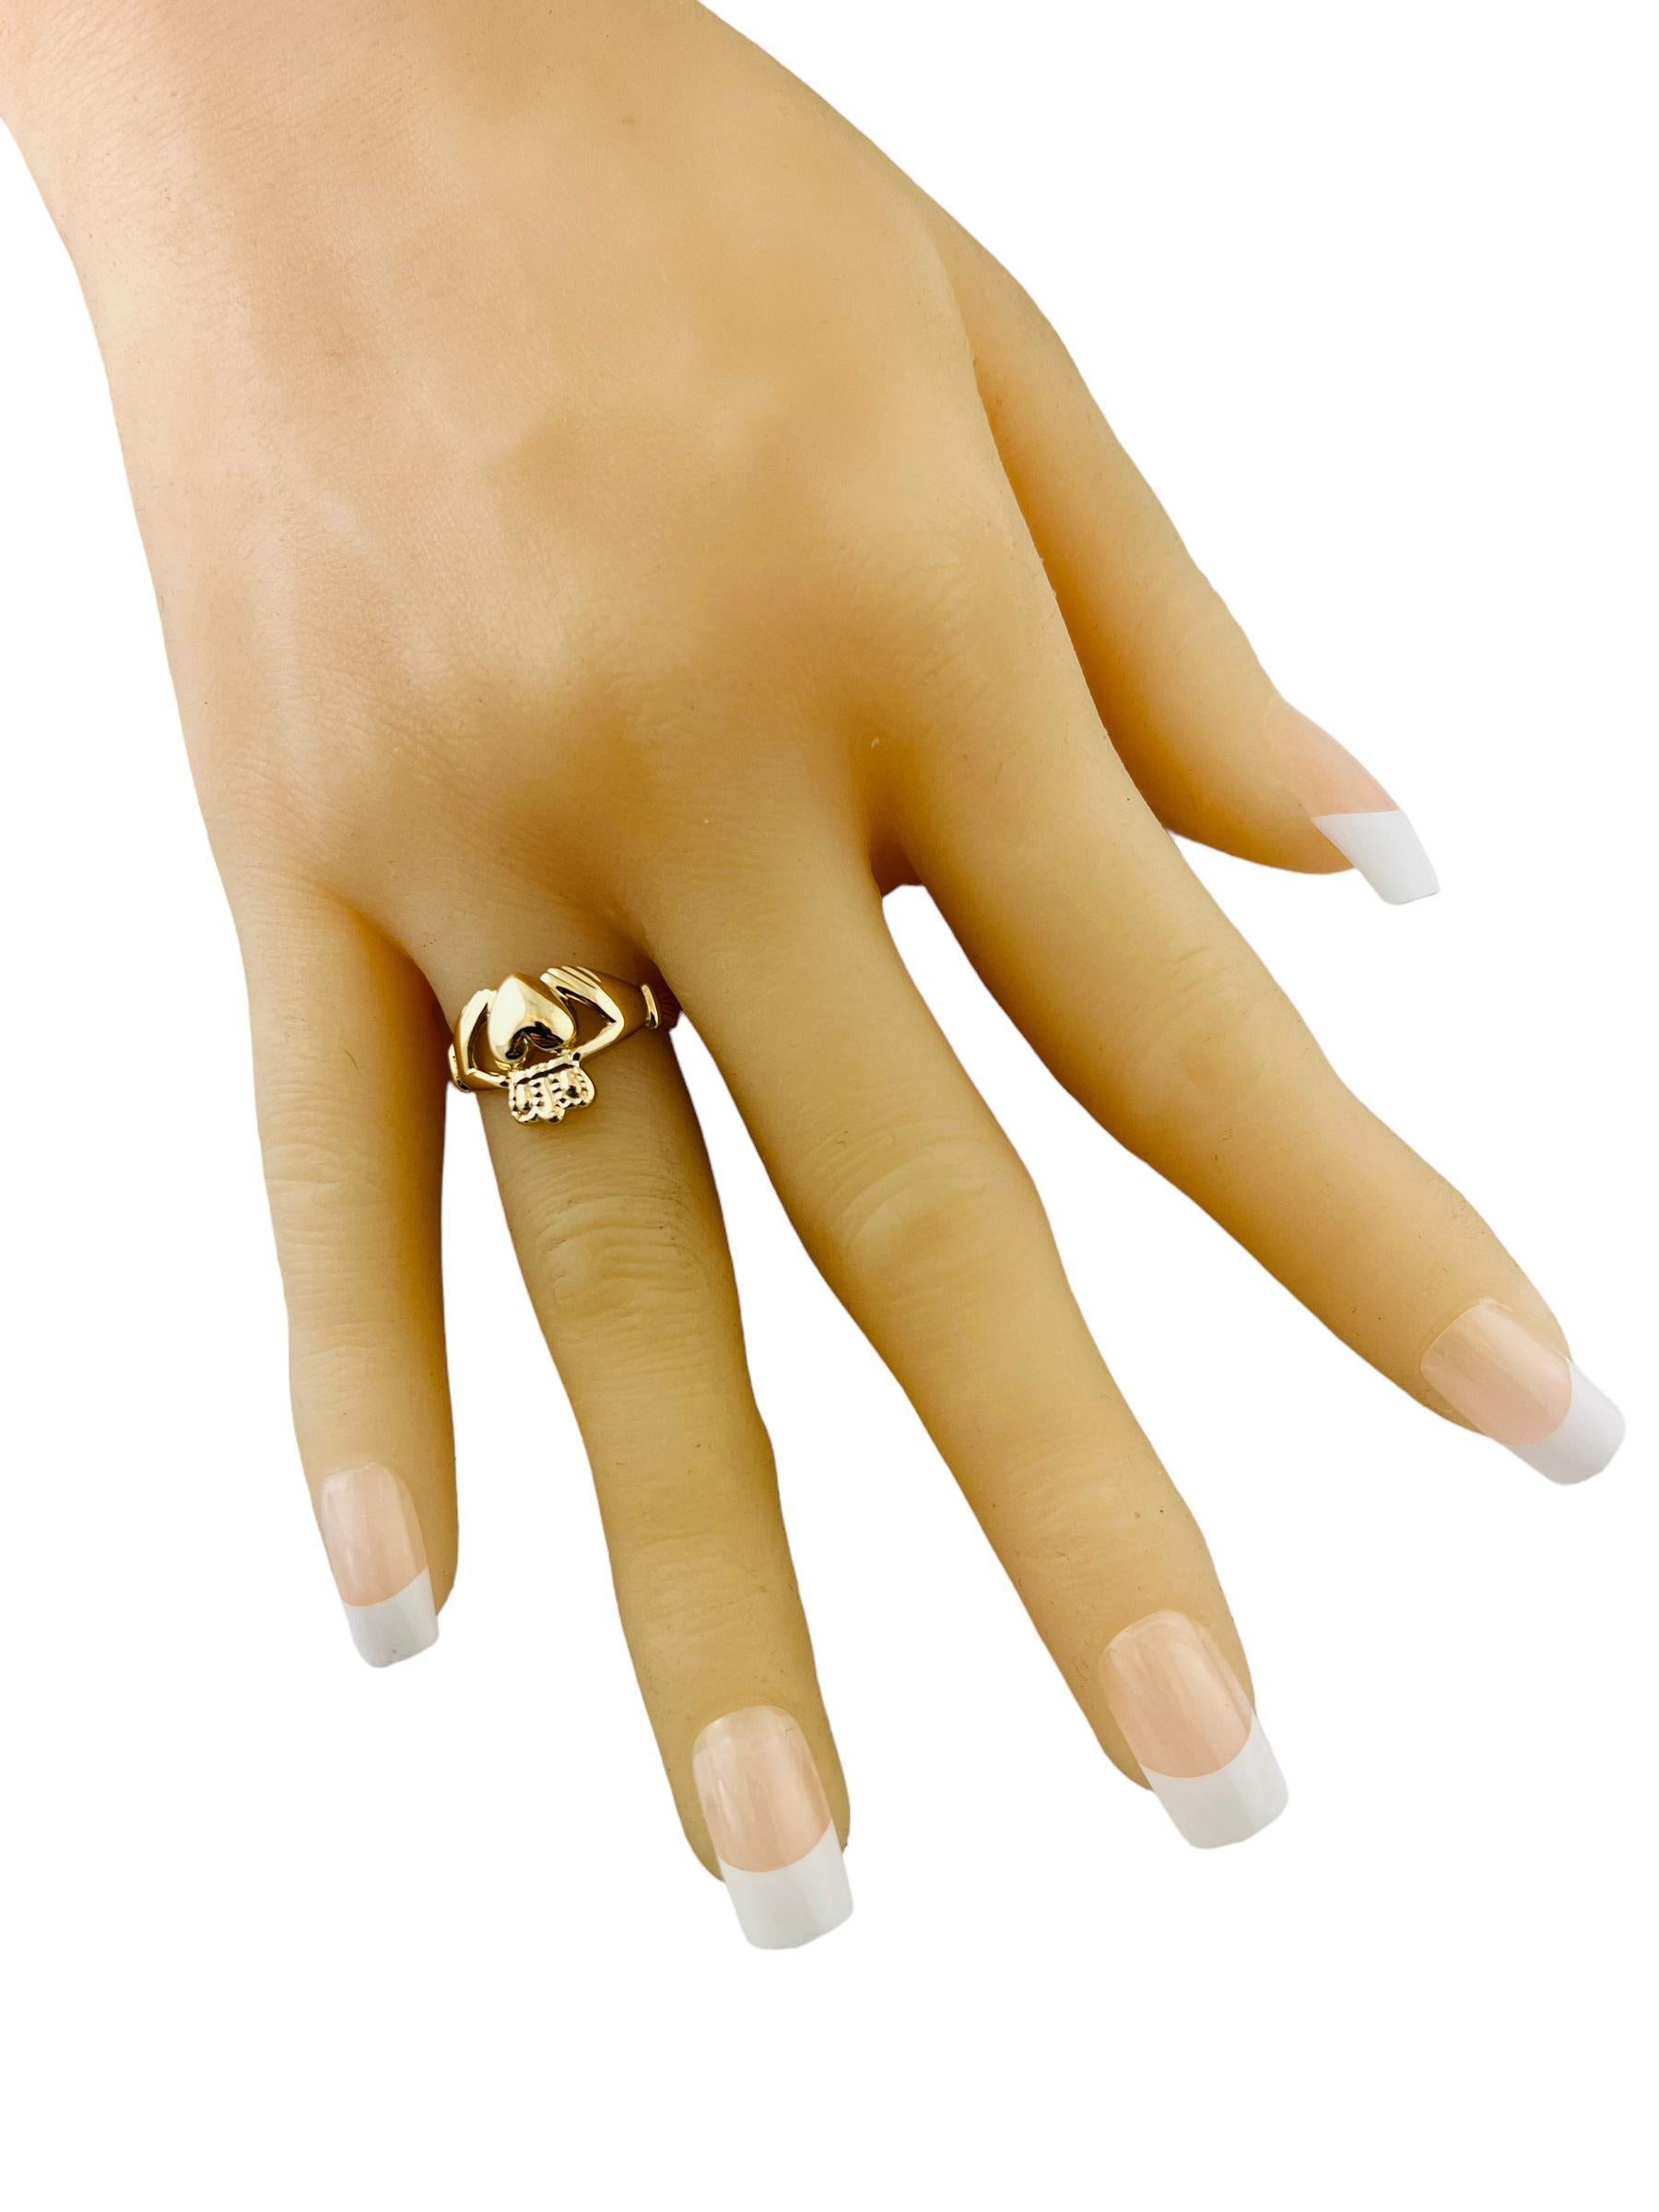 14K Yellow Gold Irish Claddagh Ring Size 6 #15618 For Sale 1